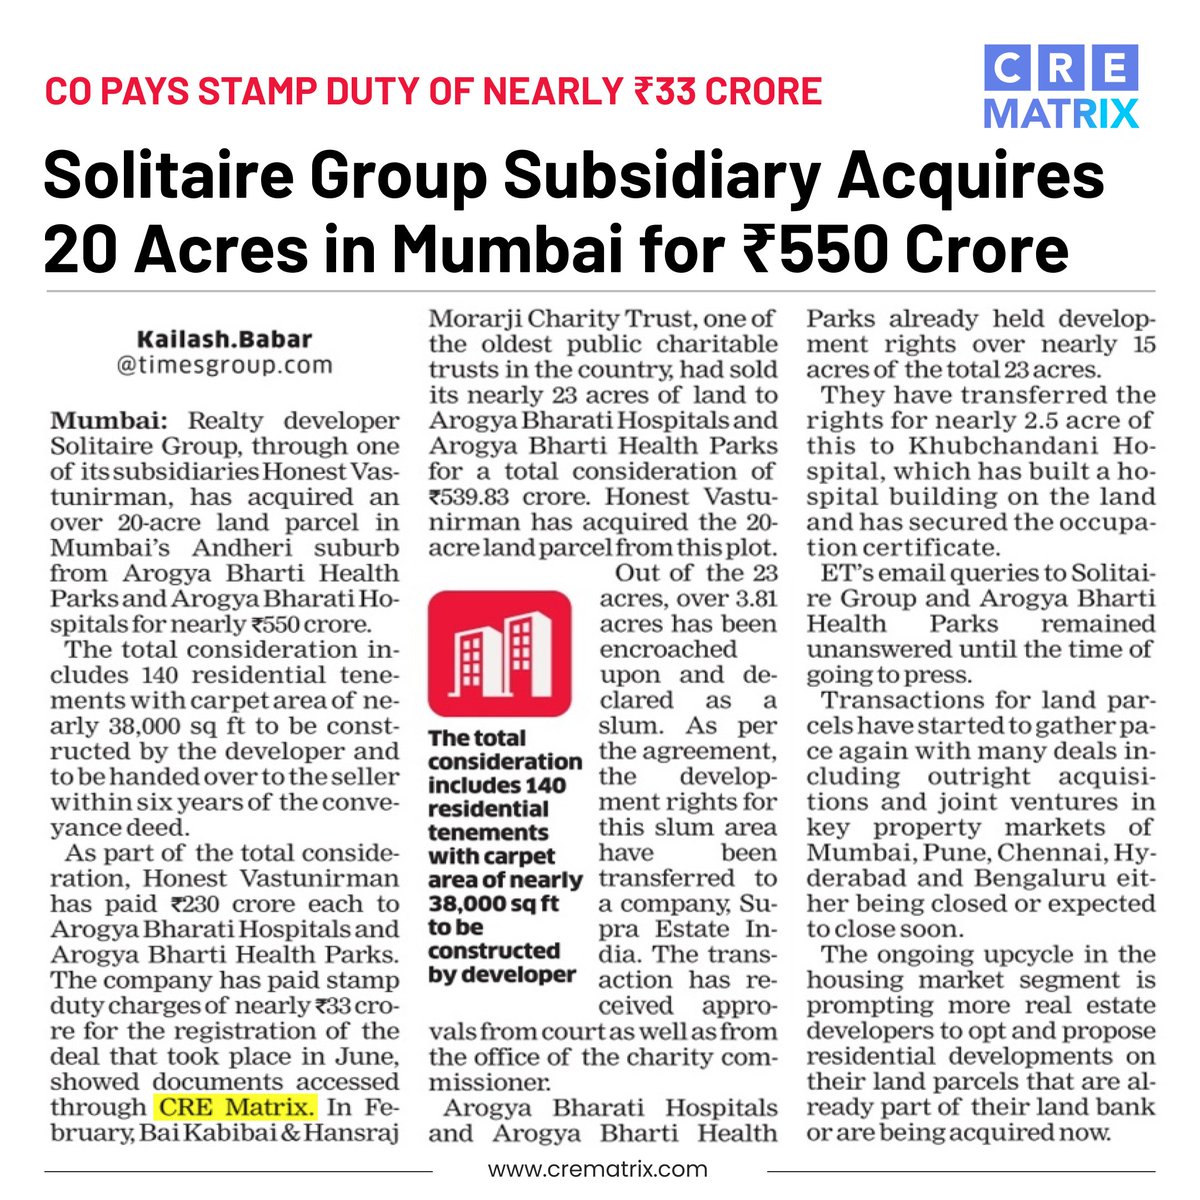 According to documents accessed by CRE Matrix, realty developer Solitaire Group acquires a 20-acre land parcel in Mumbai’s Andheri for a whopping 550 Crore INR.

#CREMatrix #SolitaireGroup #LandParcel #Plot #CommercialRealEstate #RealEstate #RealEstateIndia #Data #Proptech